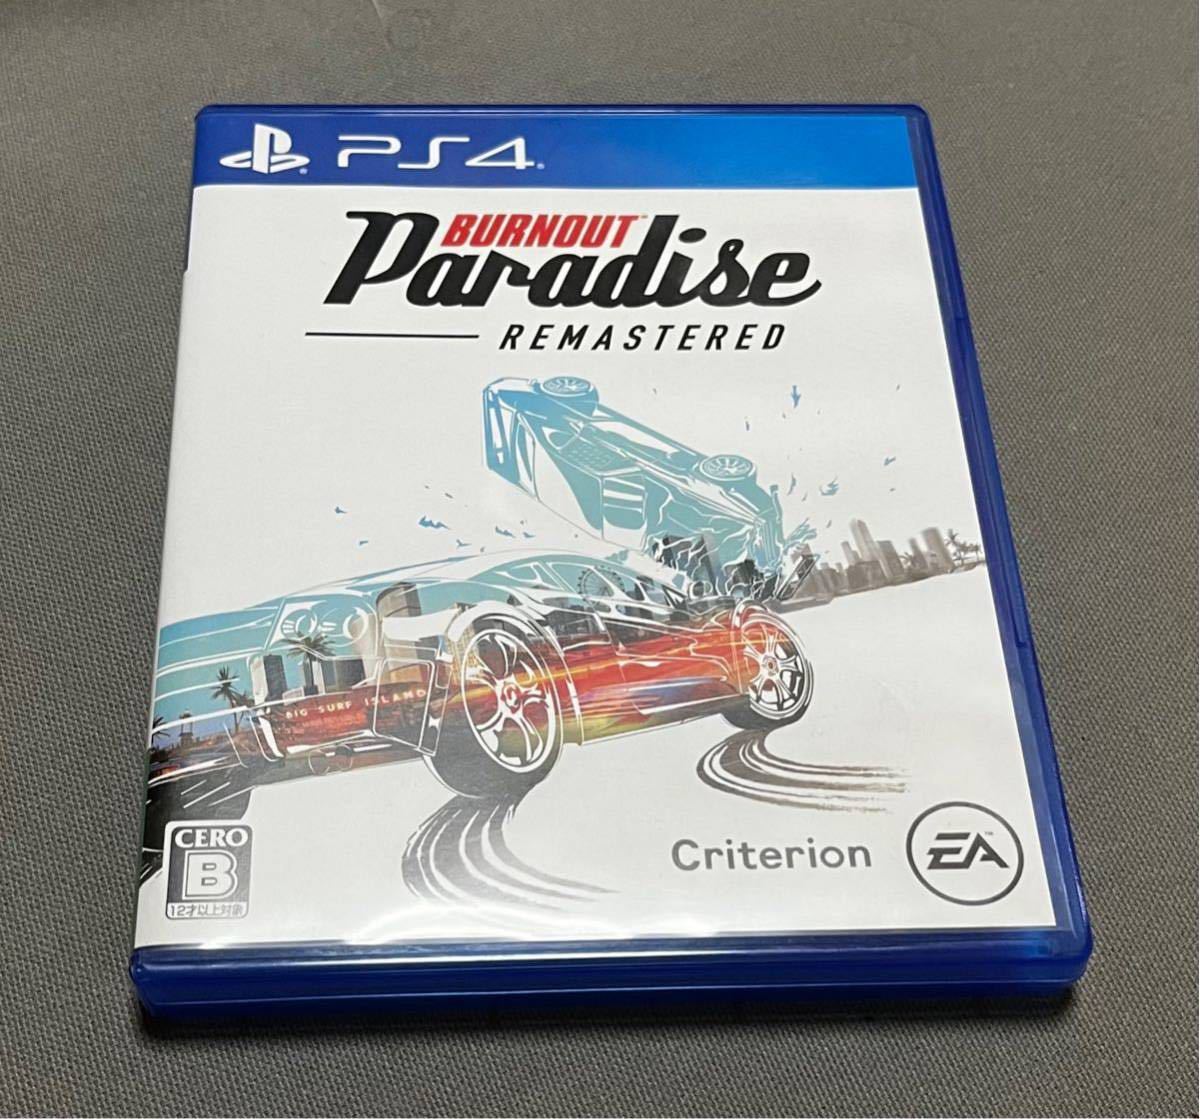 PS4 ソフト Burnout Paradise Remastered  即日発送♪